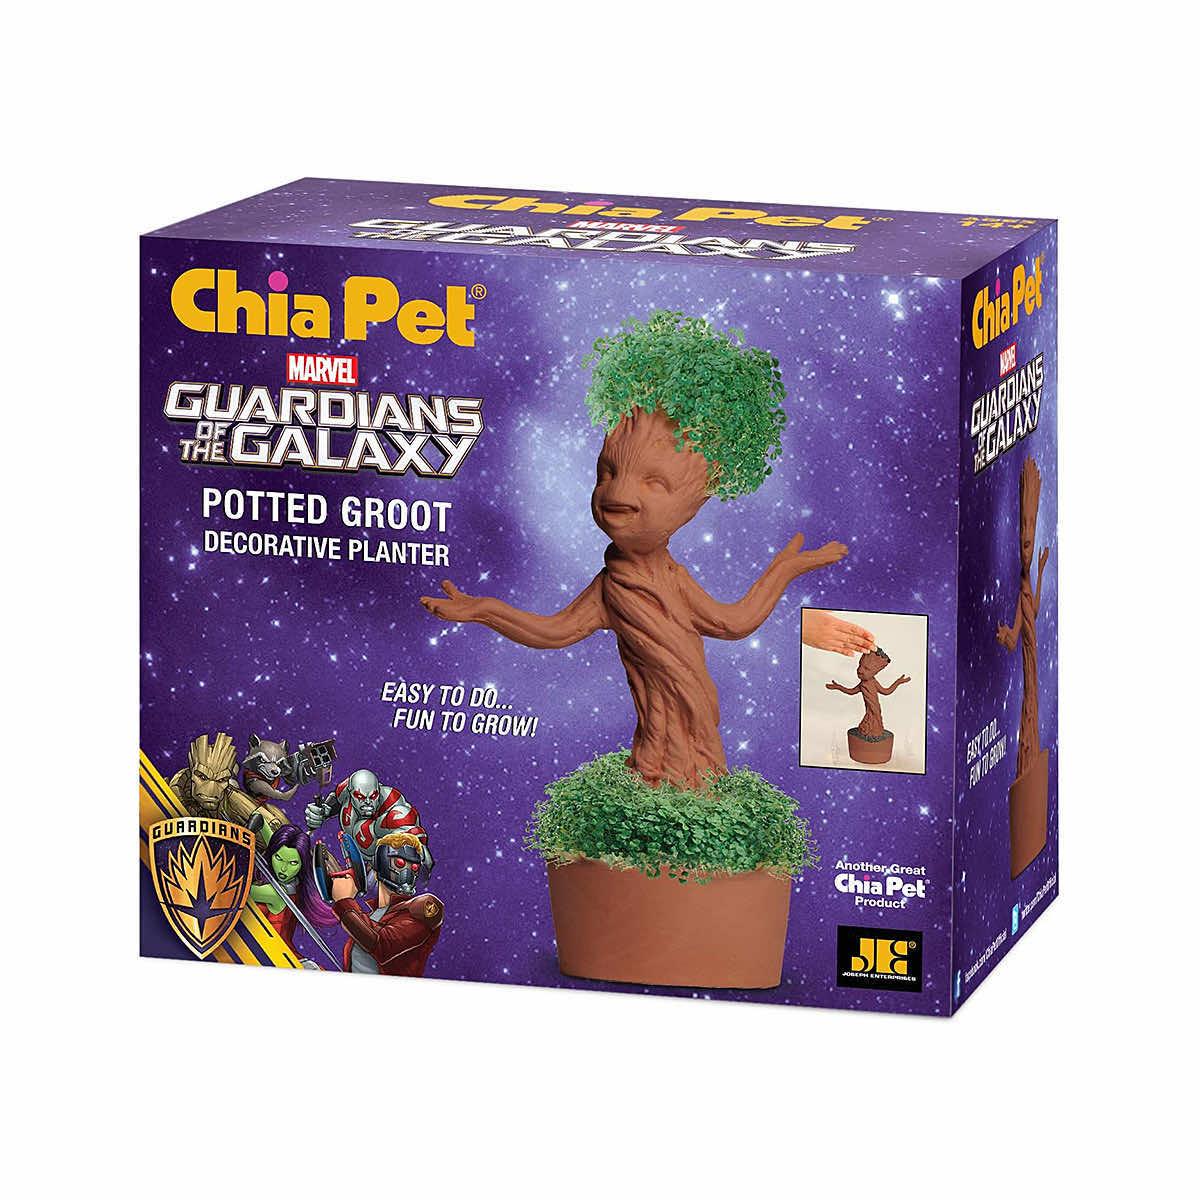  Chia Pet Potted Groot